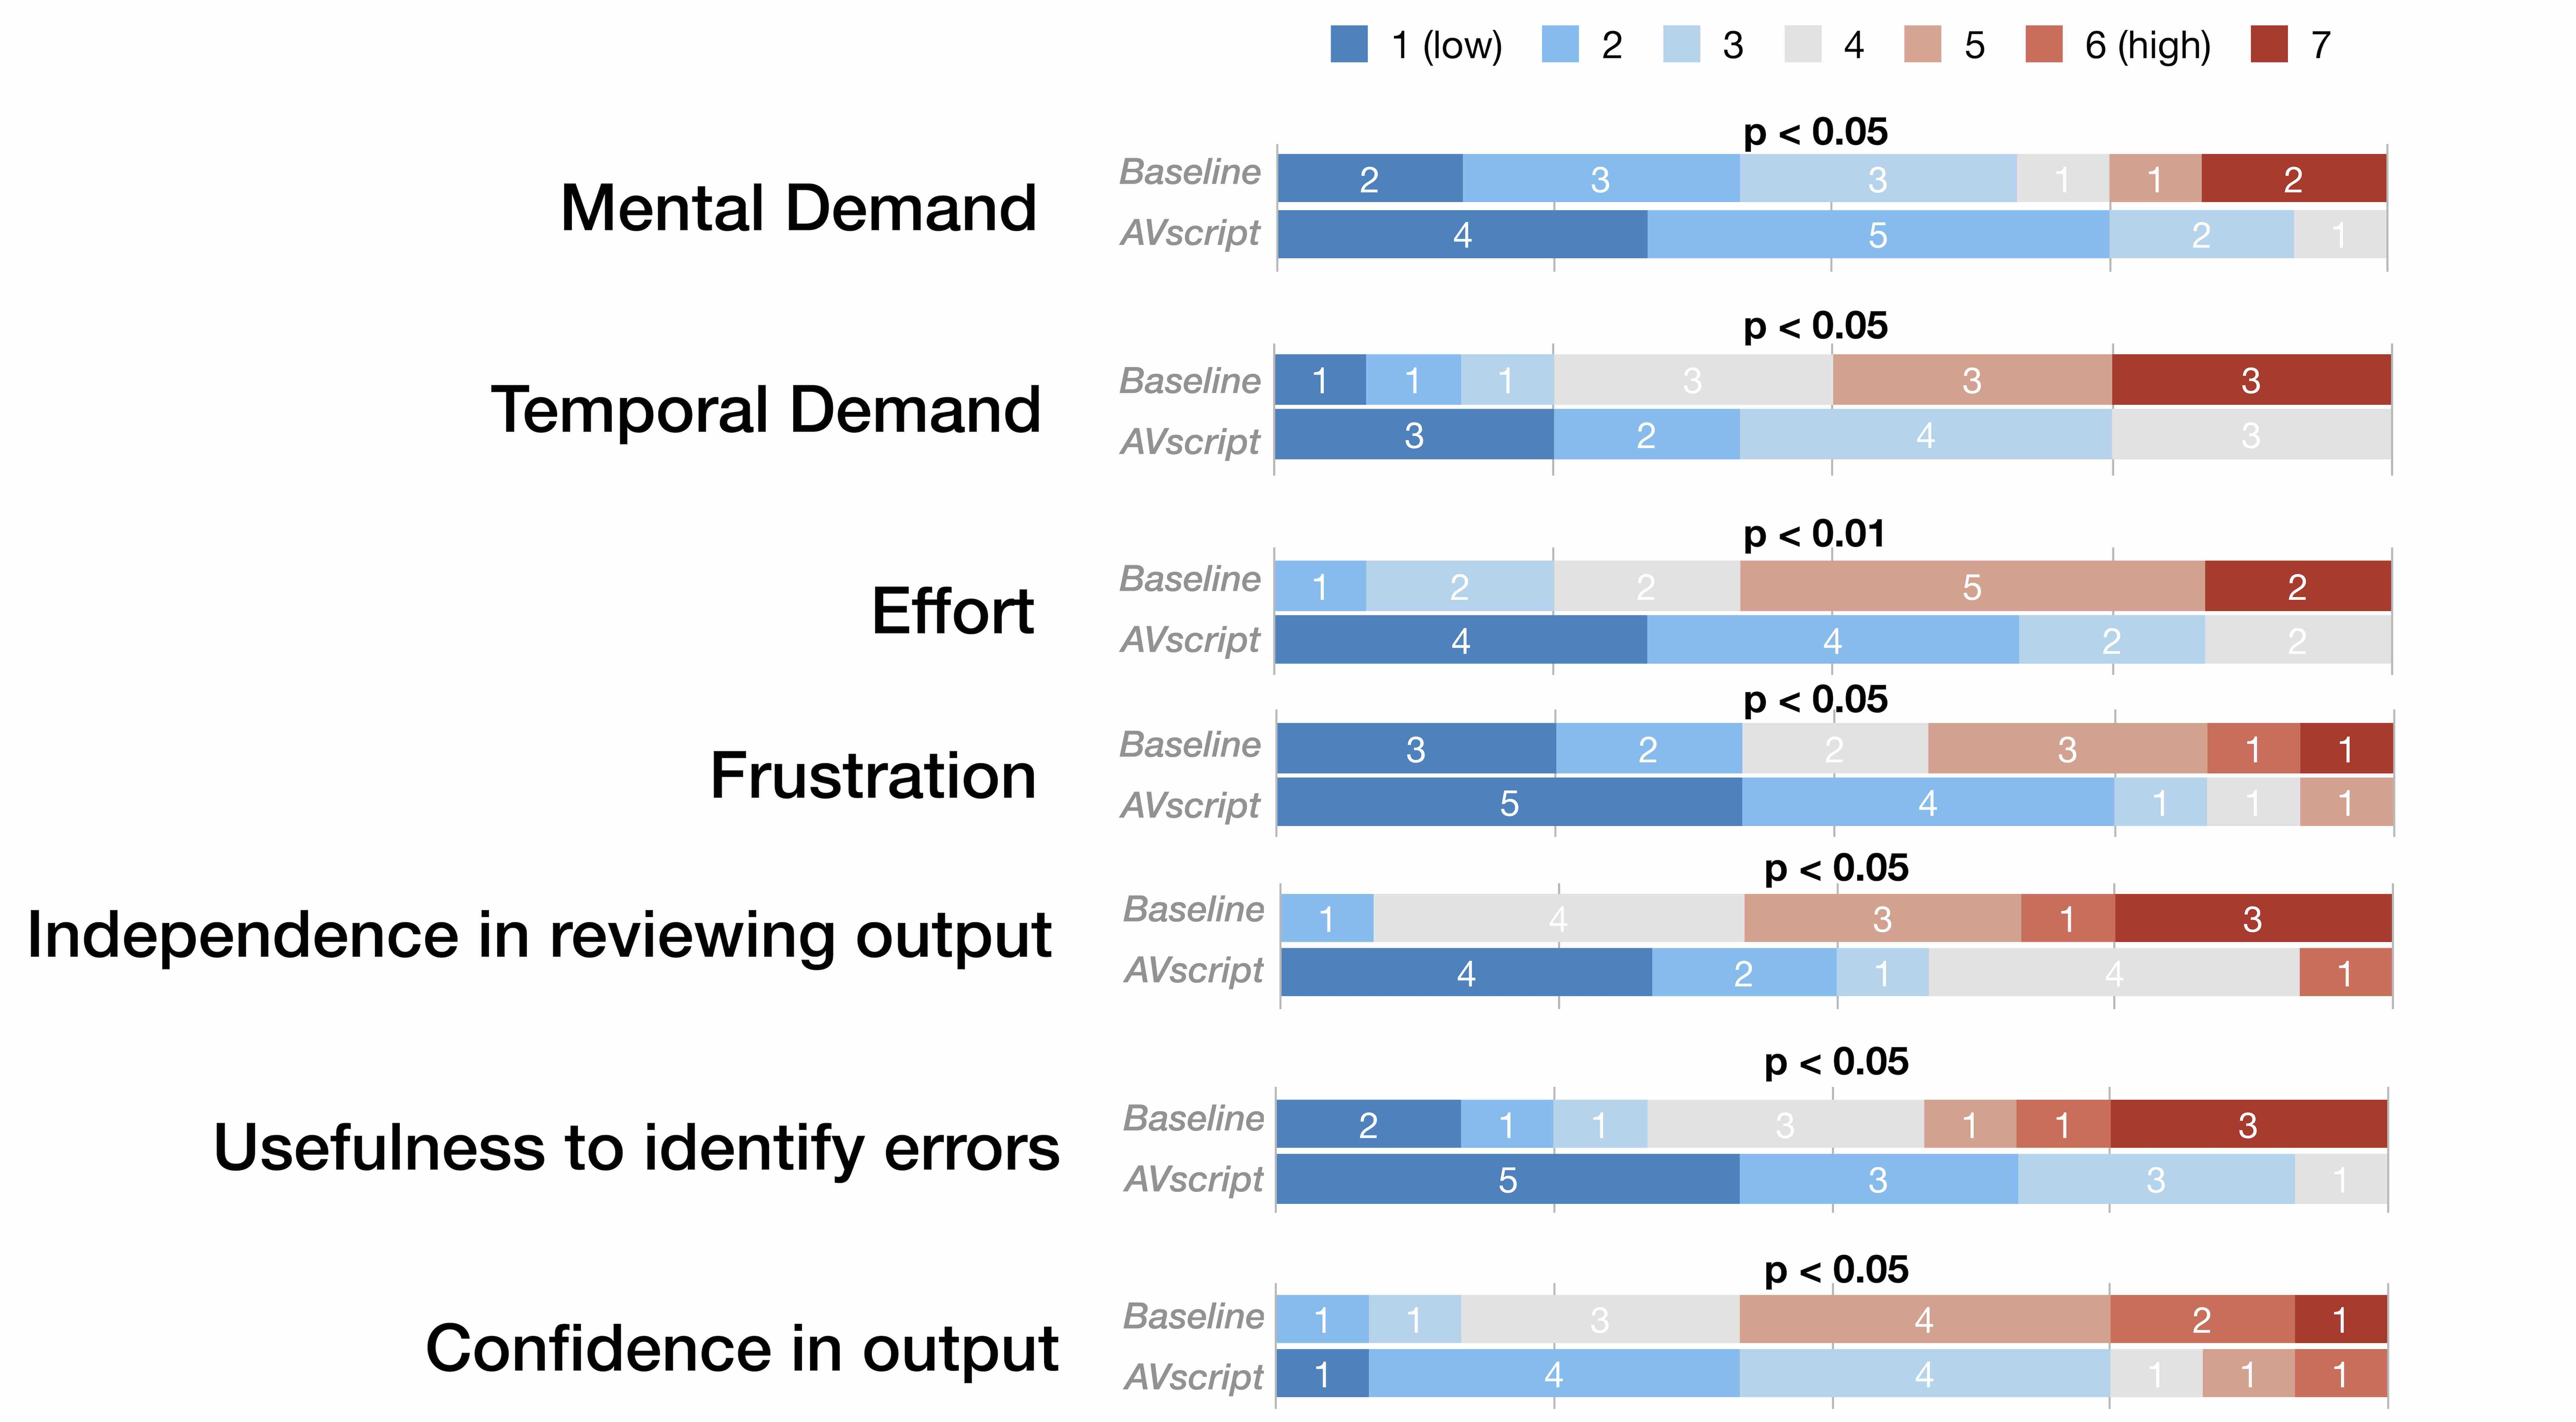 The stacked bar charts display the distribution of the rating scores for the participants' participants' personal editing tools and AVscript. Blue colors are used to indicate lower responses (positive) and red colors are used to indicate higher responses (negative). AVscript significantly outperformed users' own tools in mental demand, temporal demand, effort, frustration, confidence in the output, independence in reviewing output, and helpfulness in identifying errors.